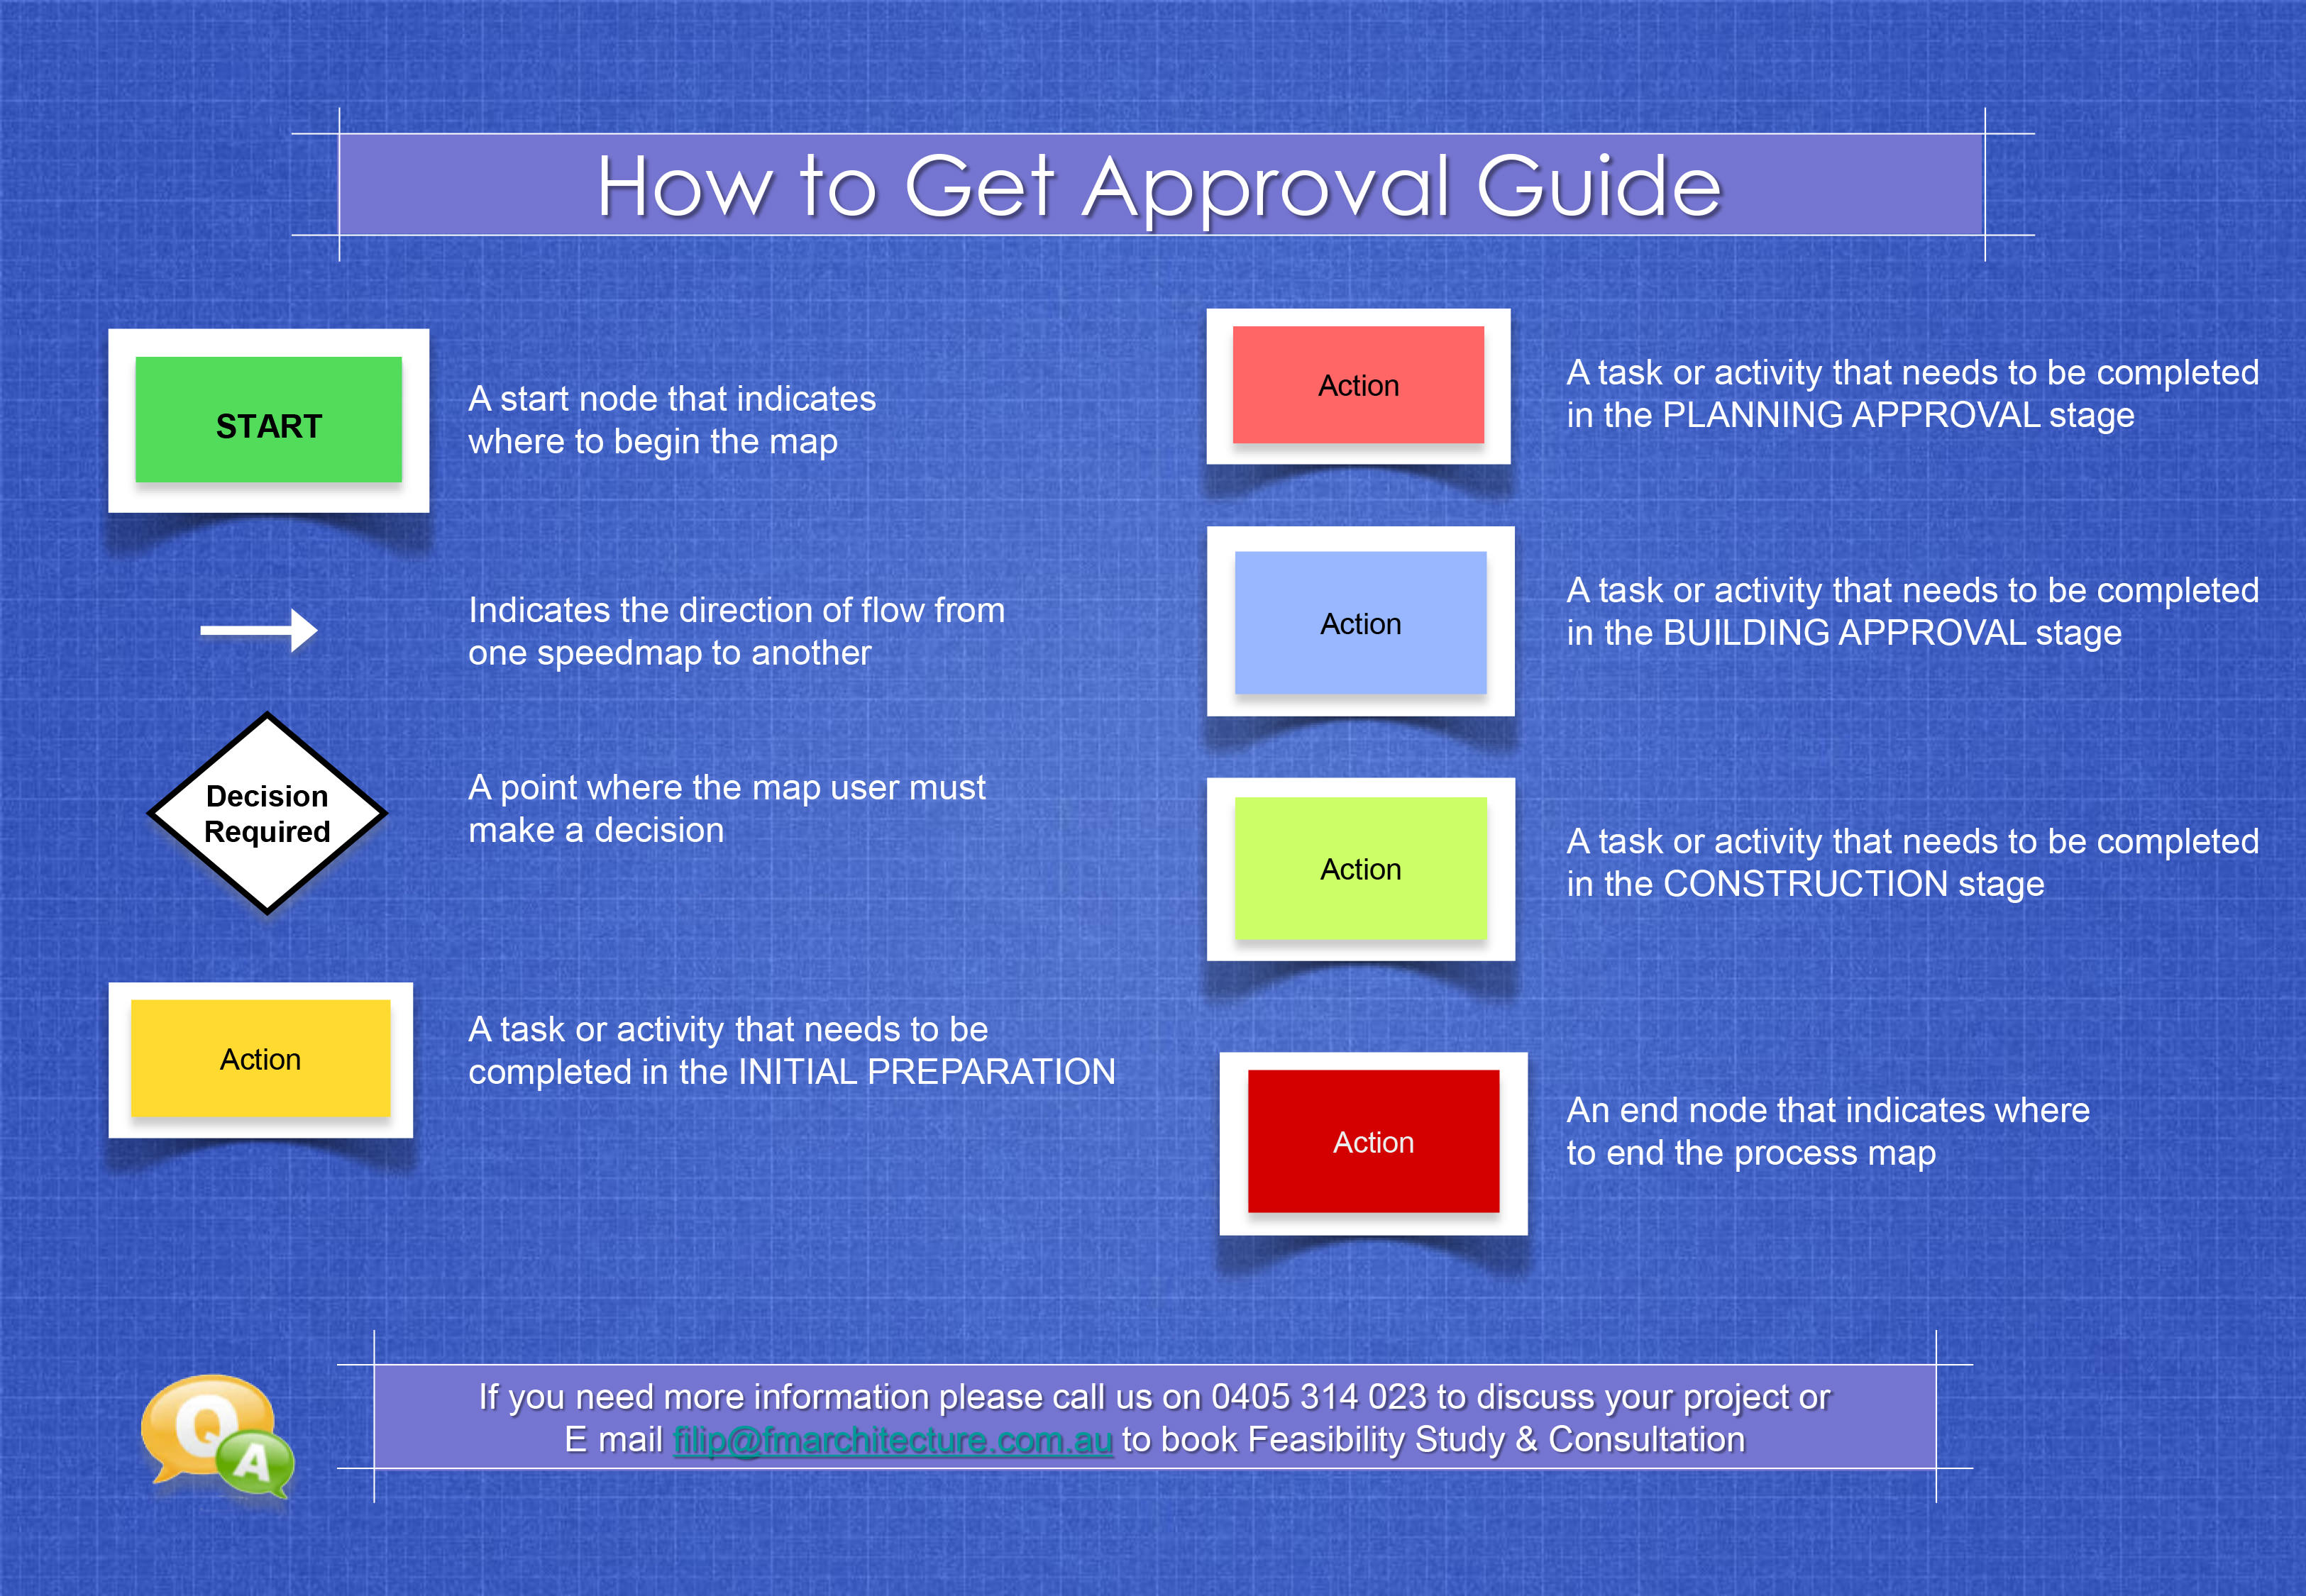 How to Get Approval Guide